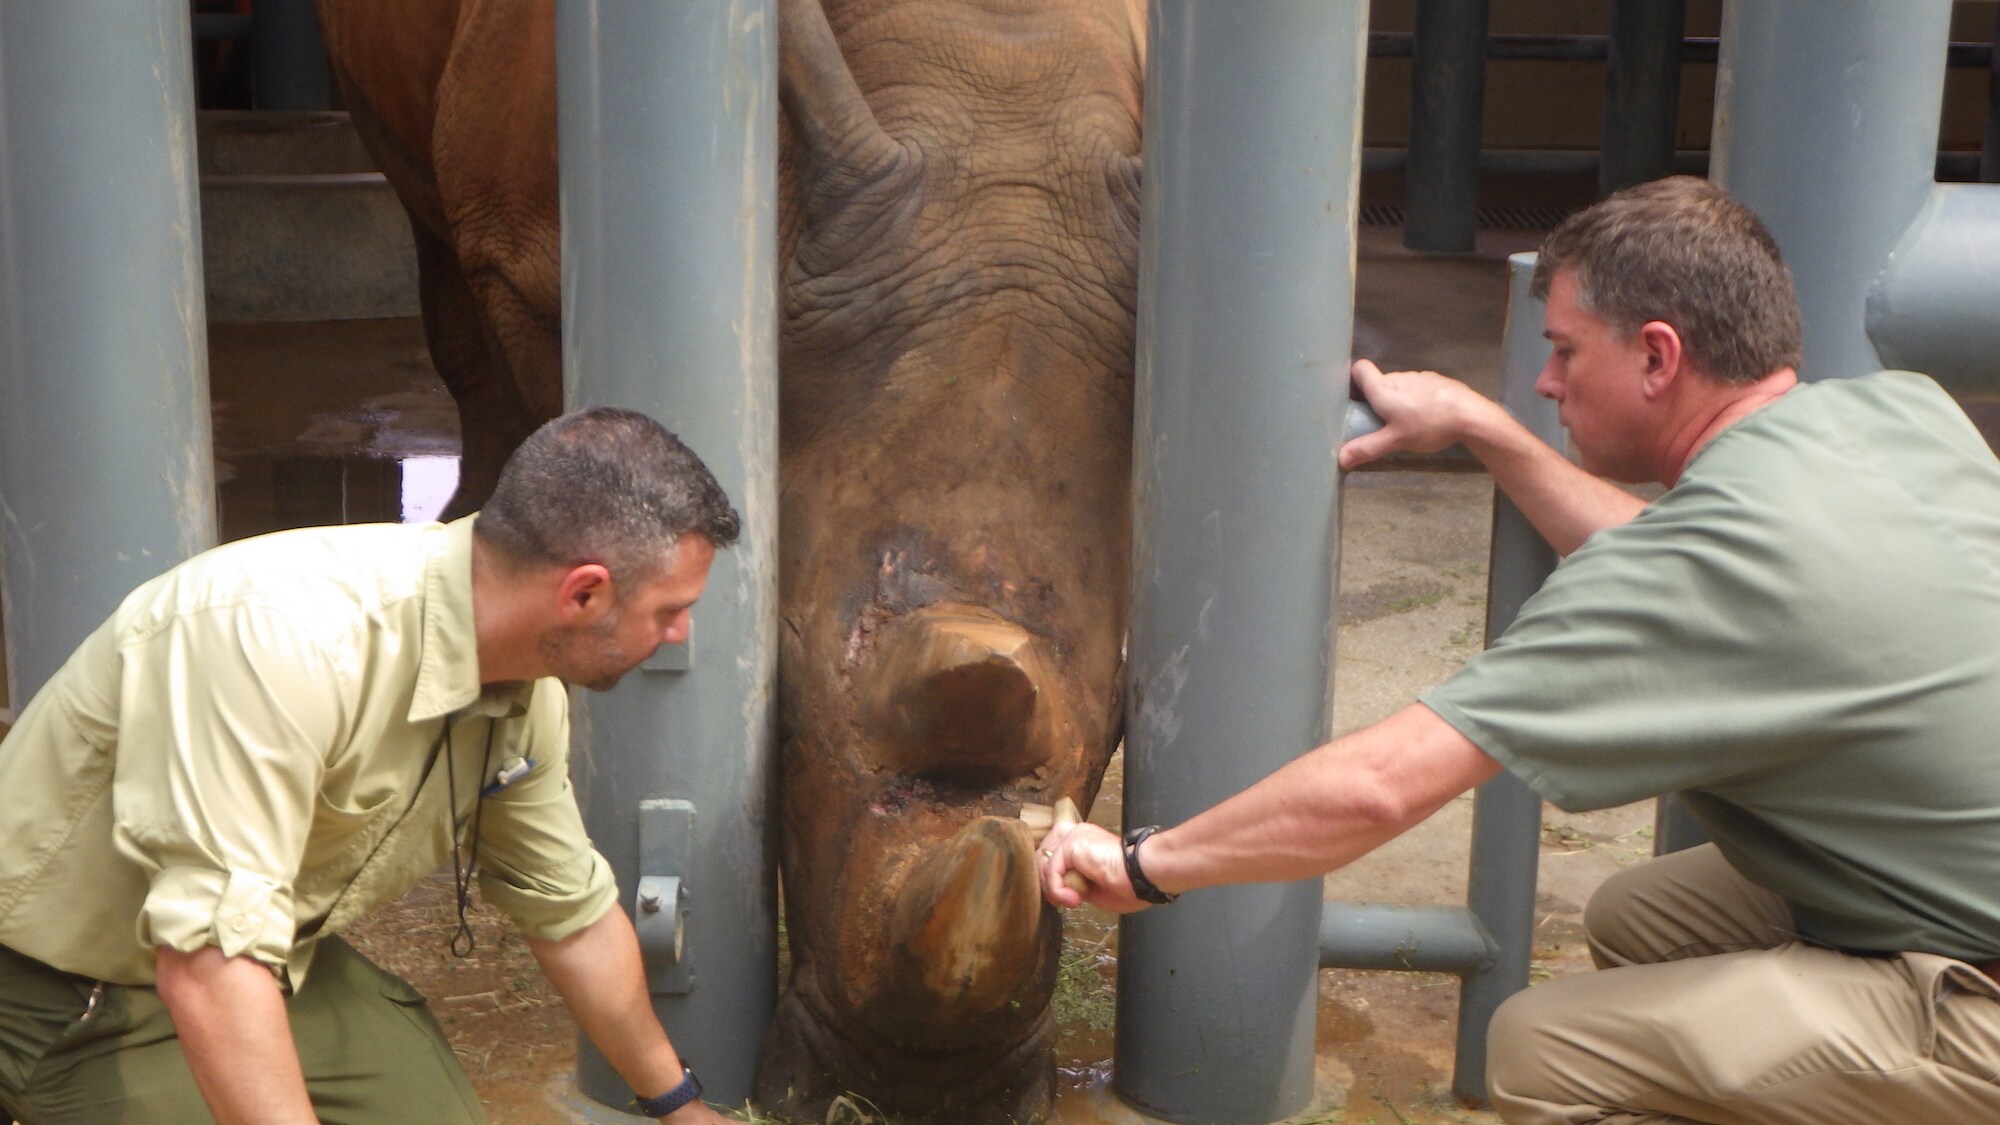 Dr. Geoff Pye cleans the area in between Dugan's horns. Dugan, the Southern White Rhino, has a wound in between his horns caused by sparring with the other rhinos. (Disney)